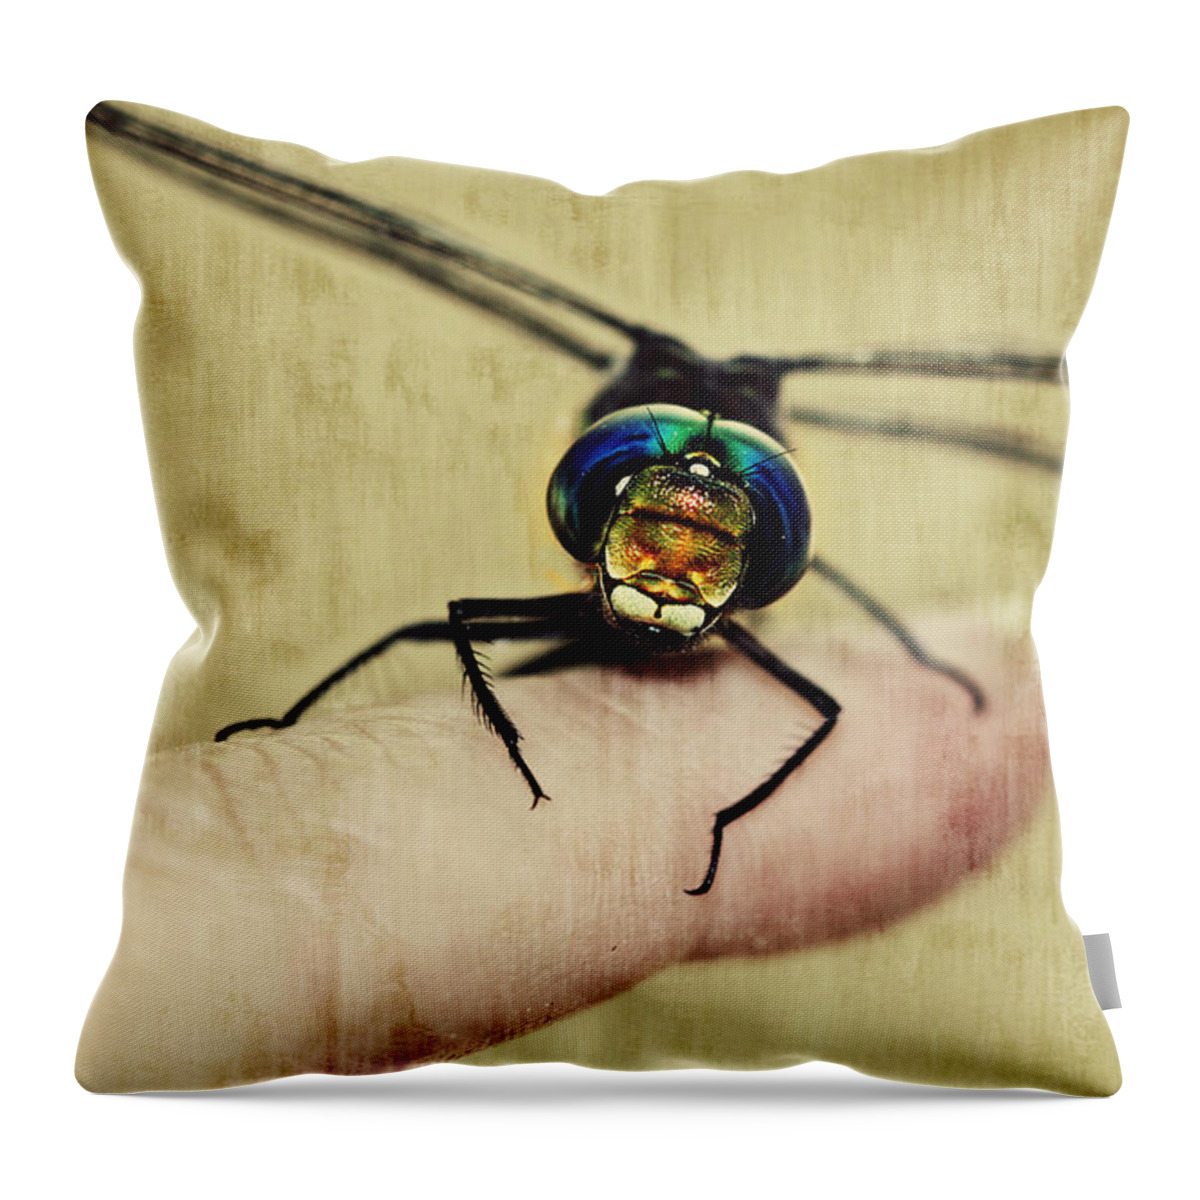 Dragonfly Throw Pillow featuring the photograph Dragonfly Moments by Melanie Lankford Photography